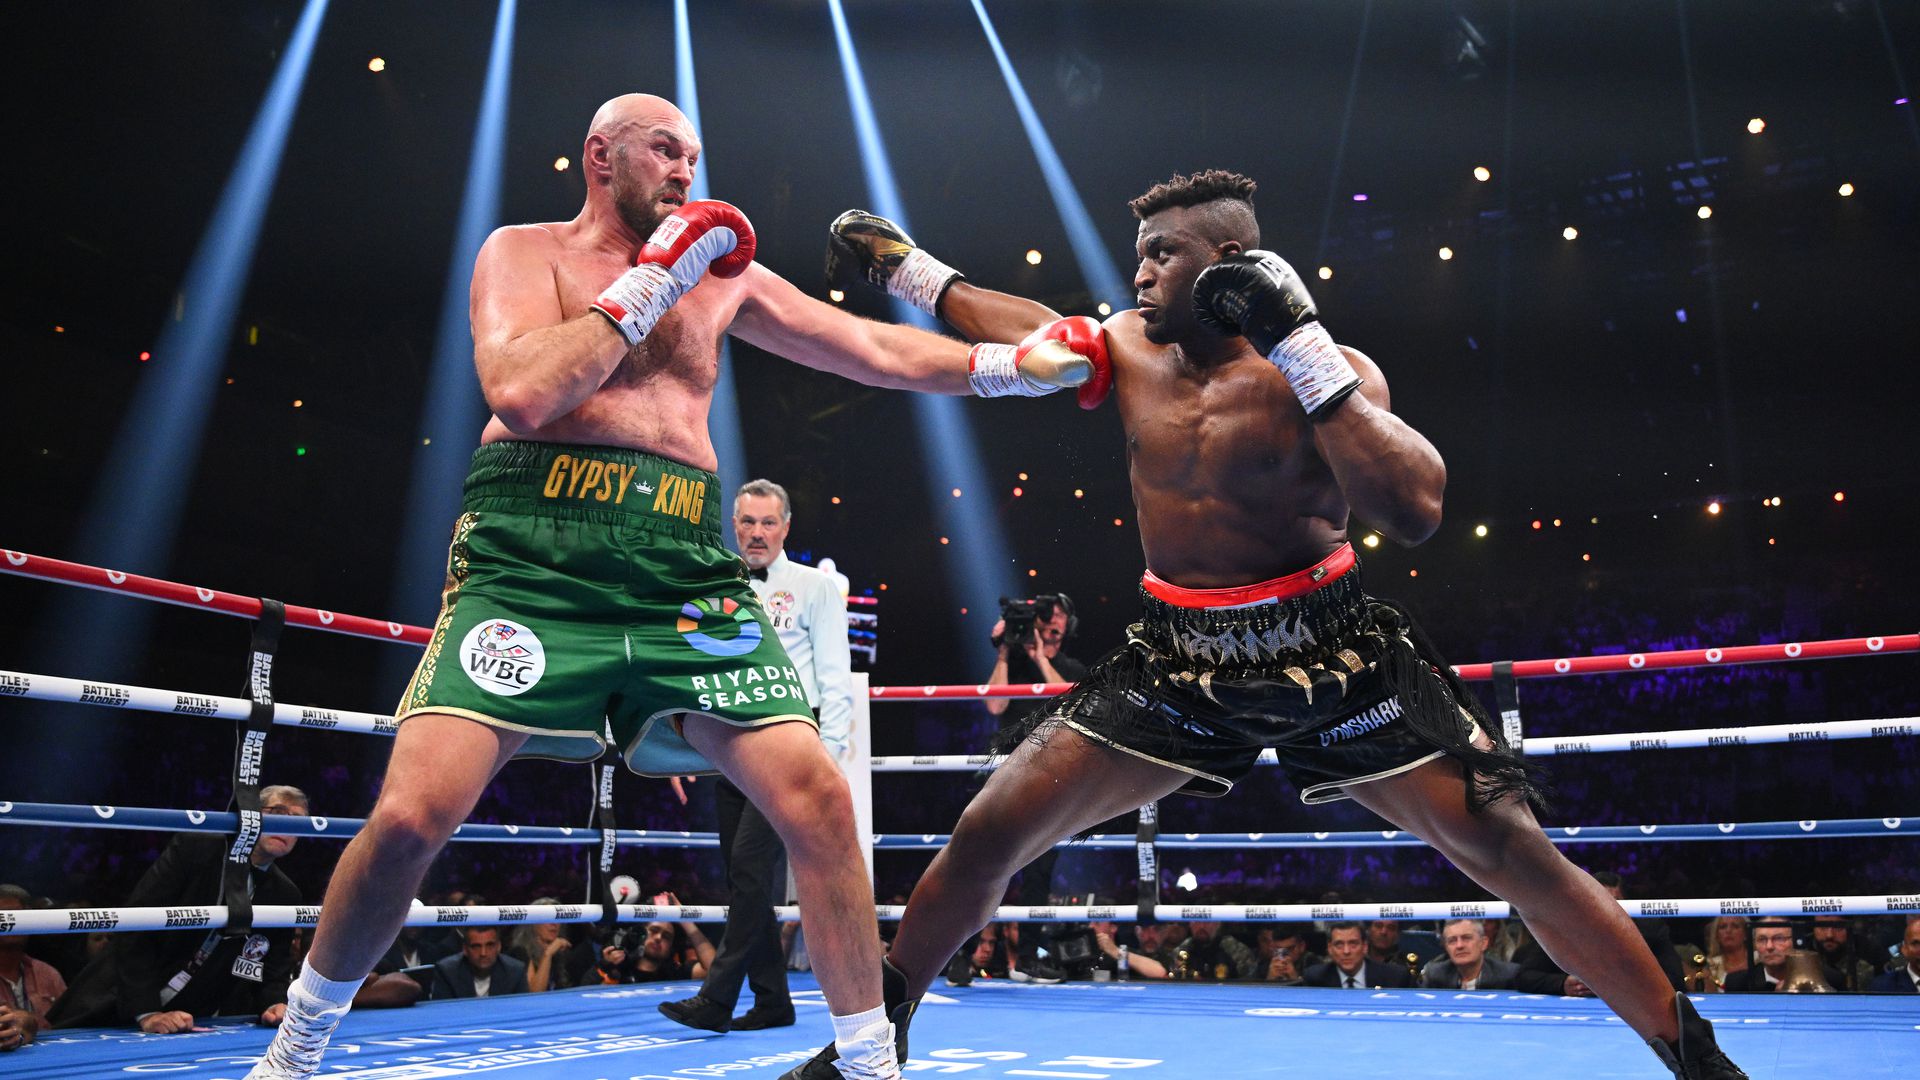 tyson fury vows to rematch francis ngannou in future, dismisses retirement talk